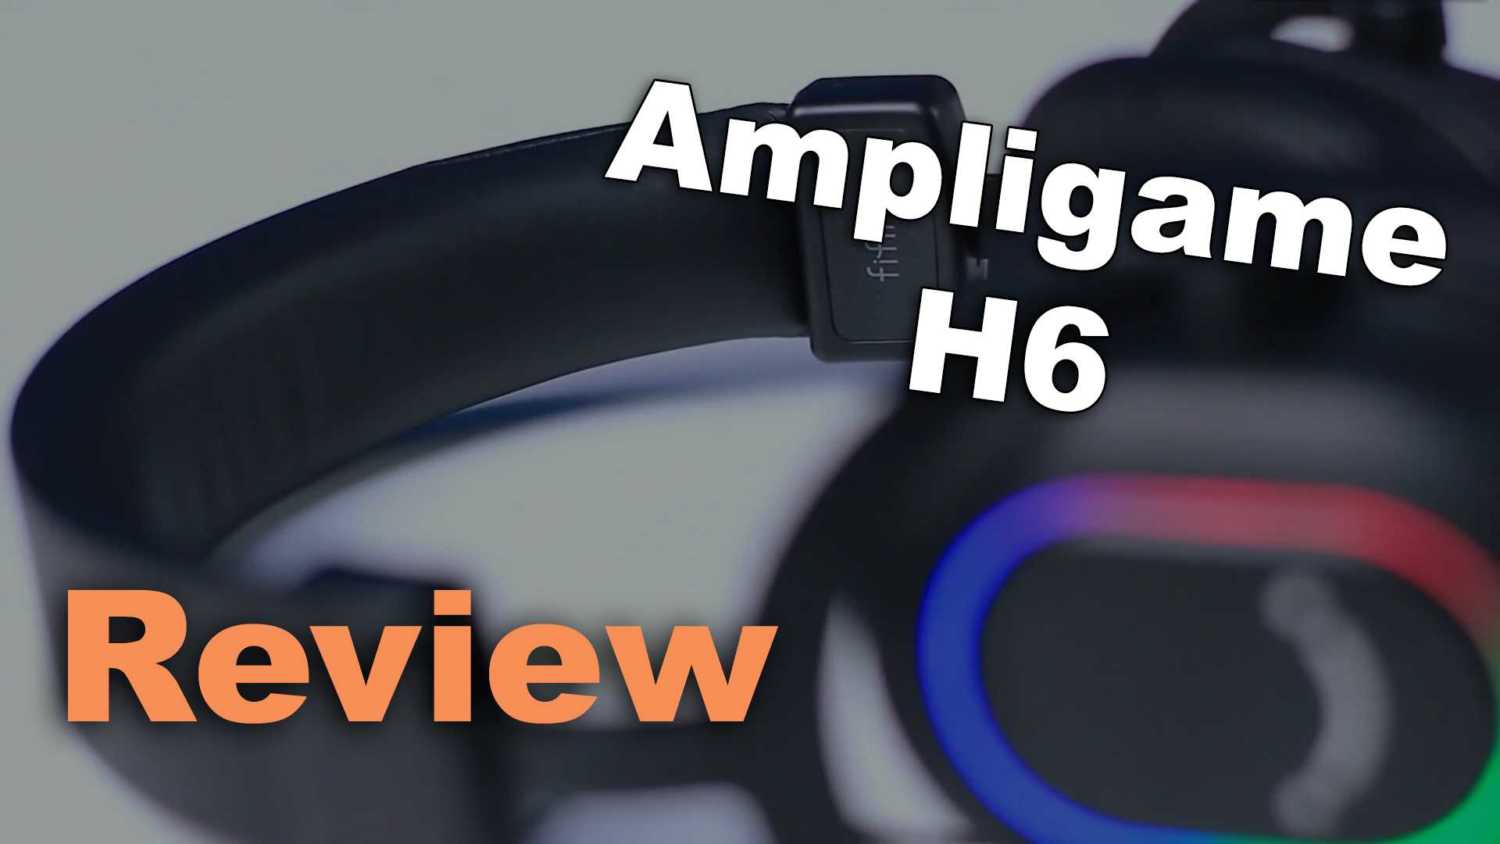 Ampligame h6 review